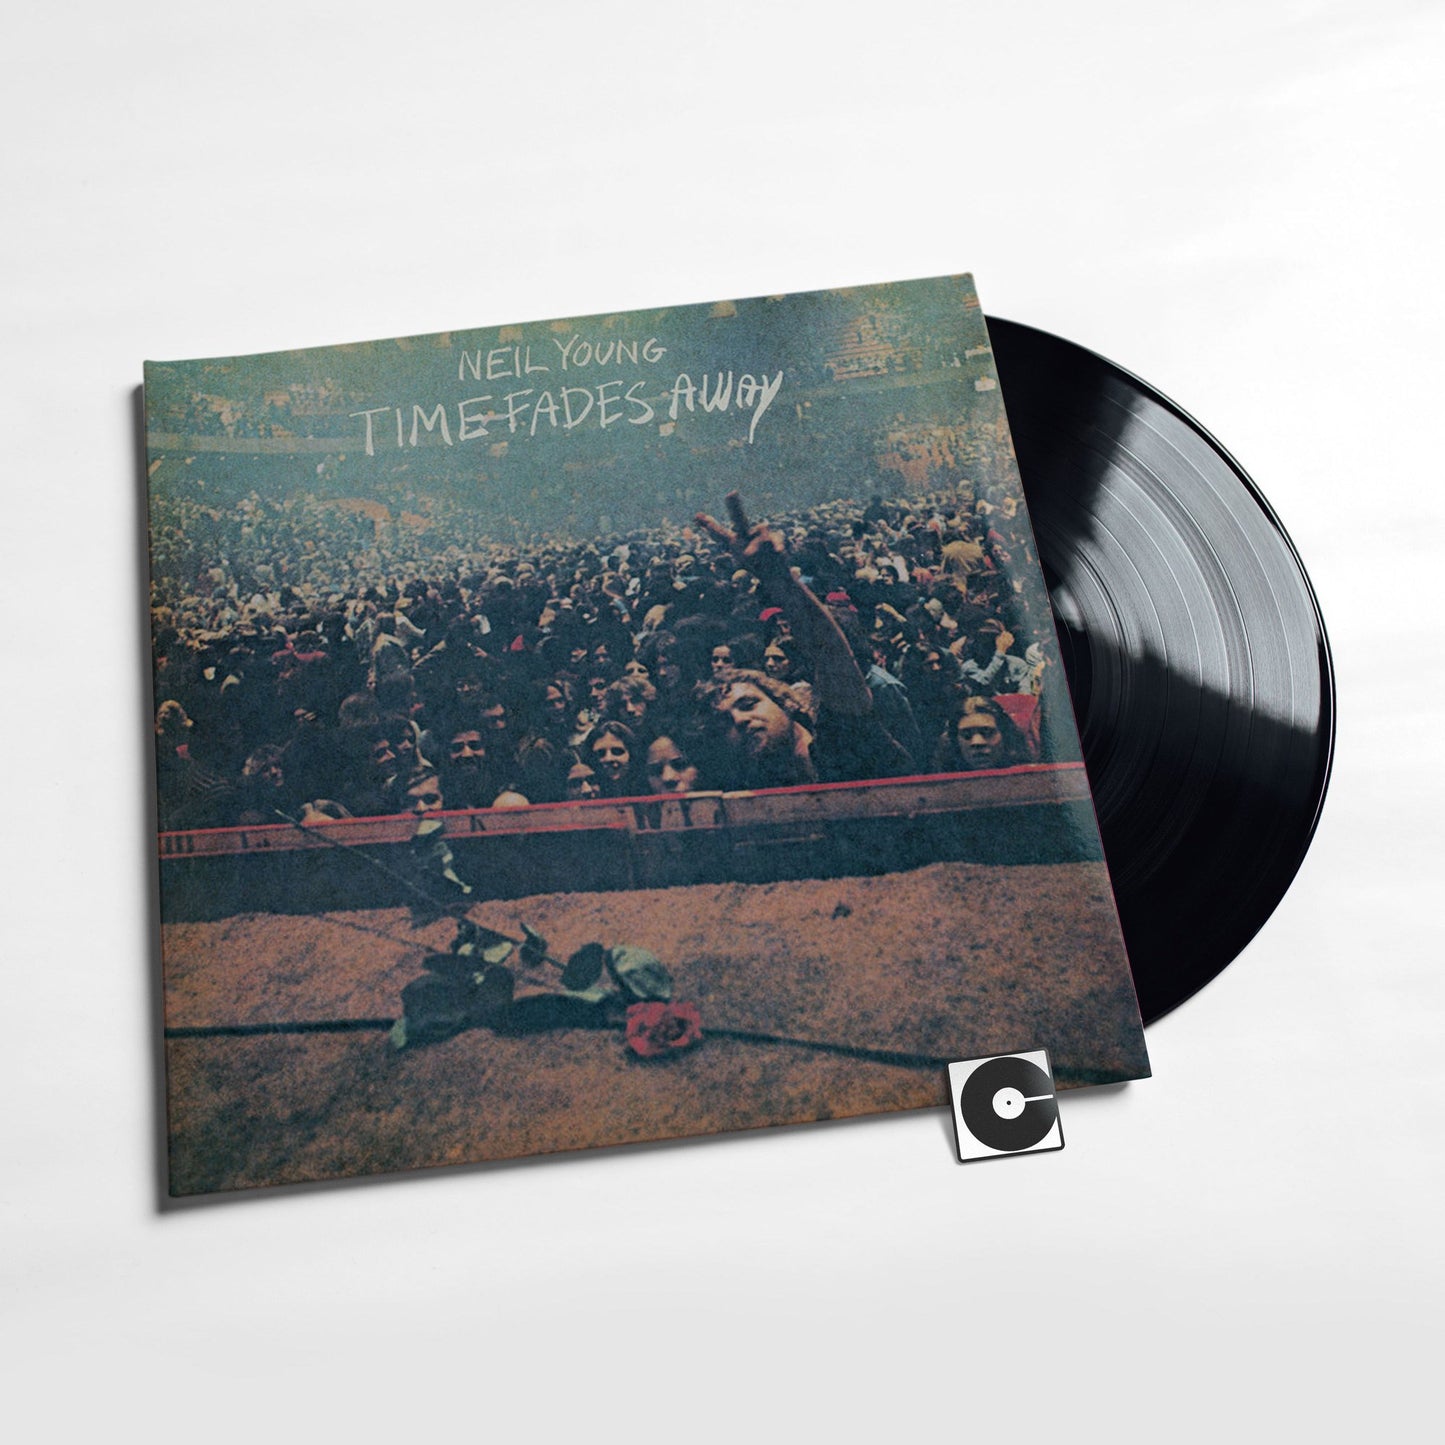 Neil Young - "Time Fades Away"